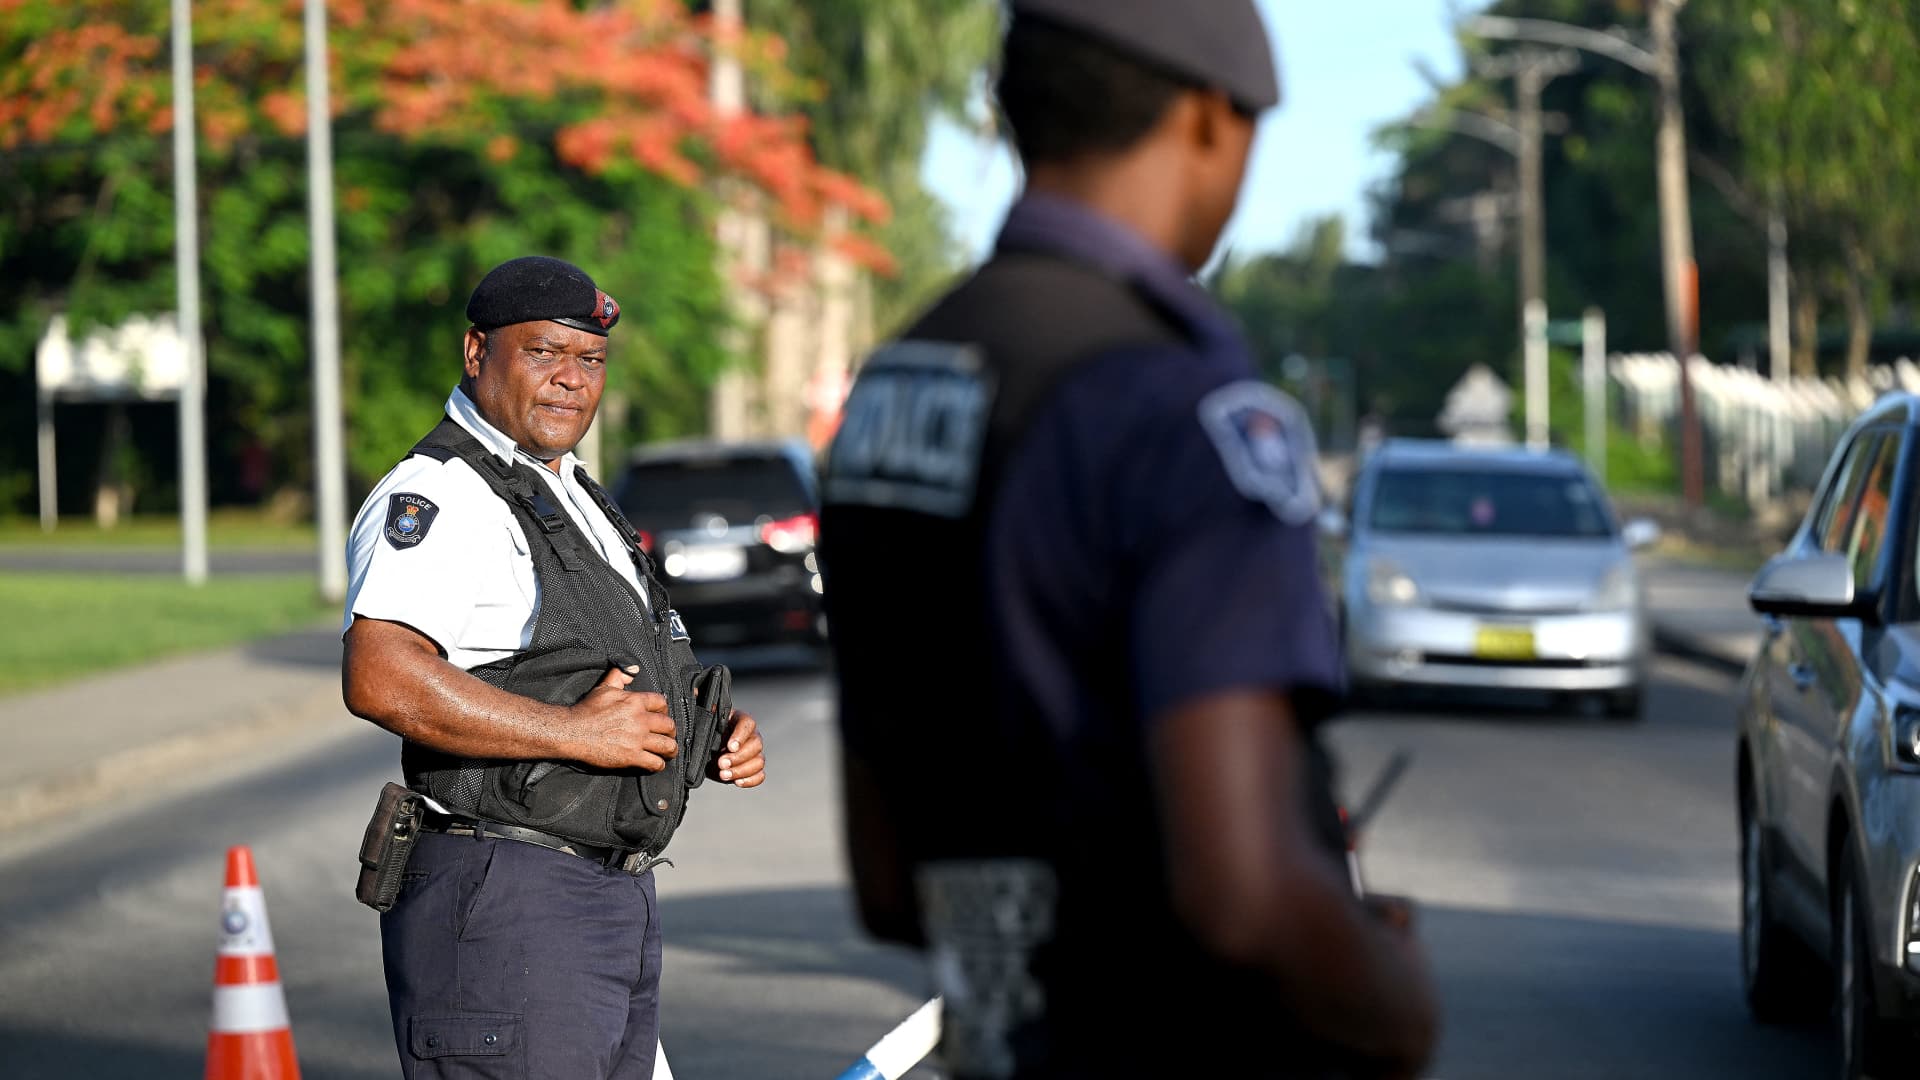 Fiji fires its top cop and scraps a policing agreement with China